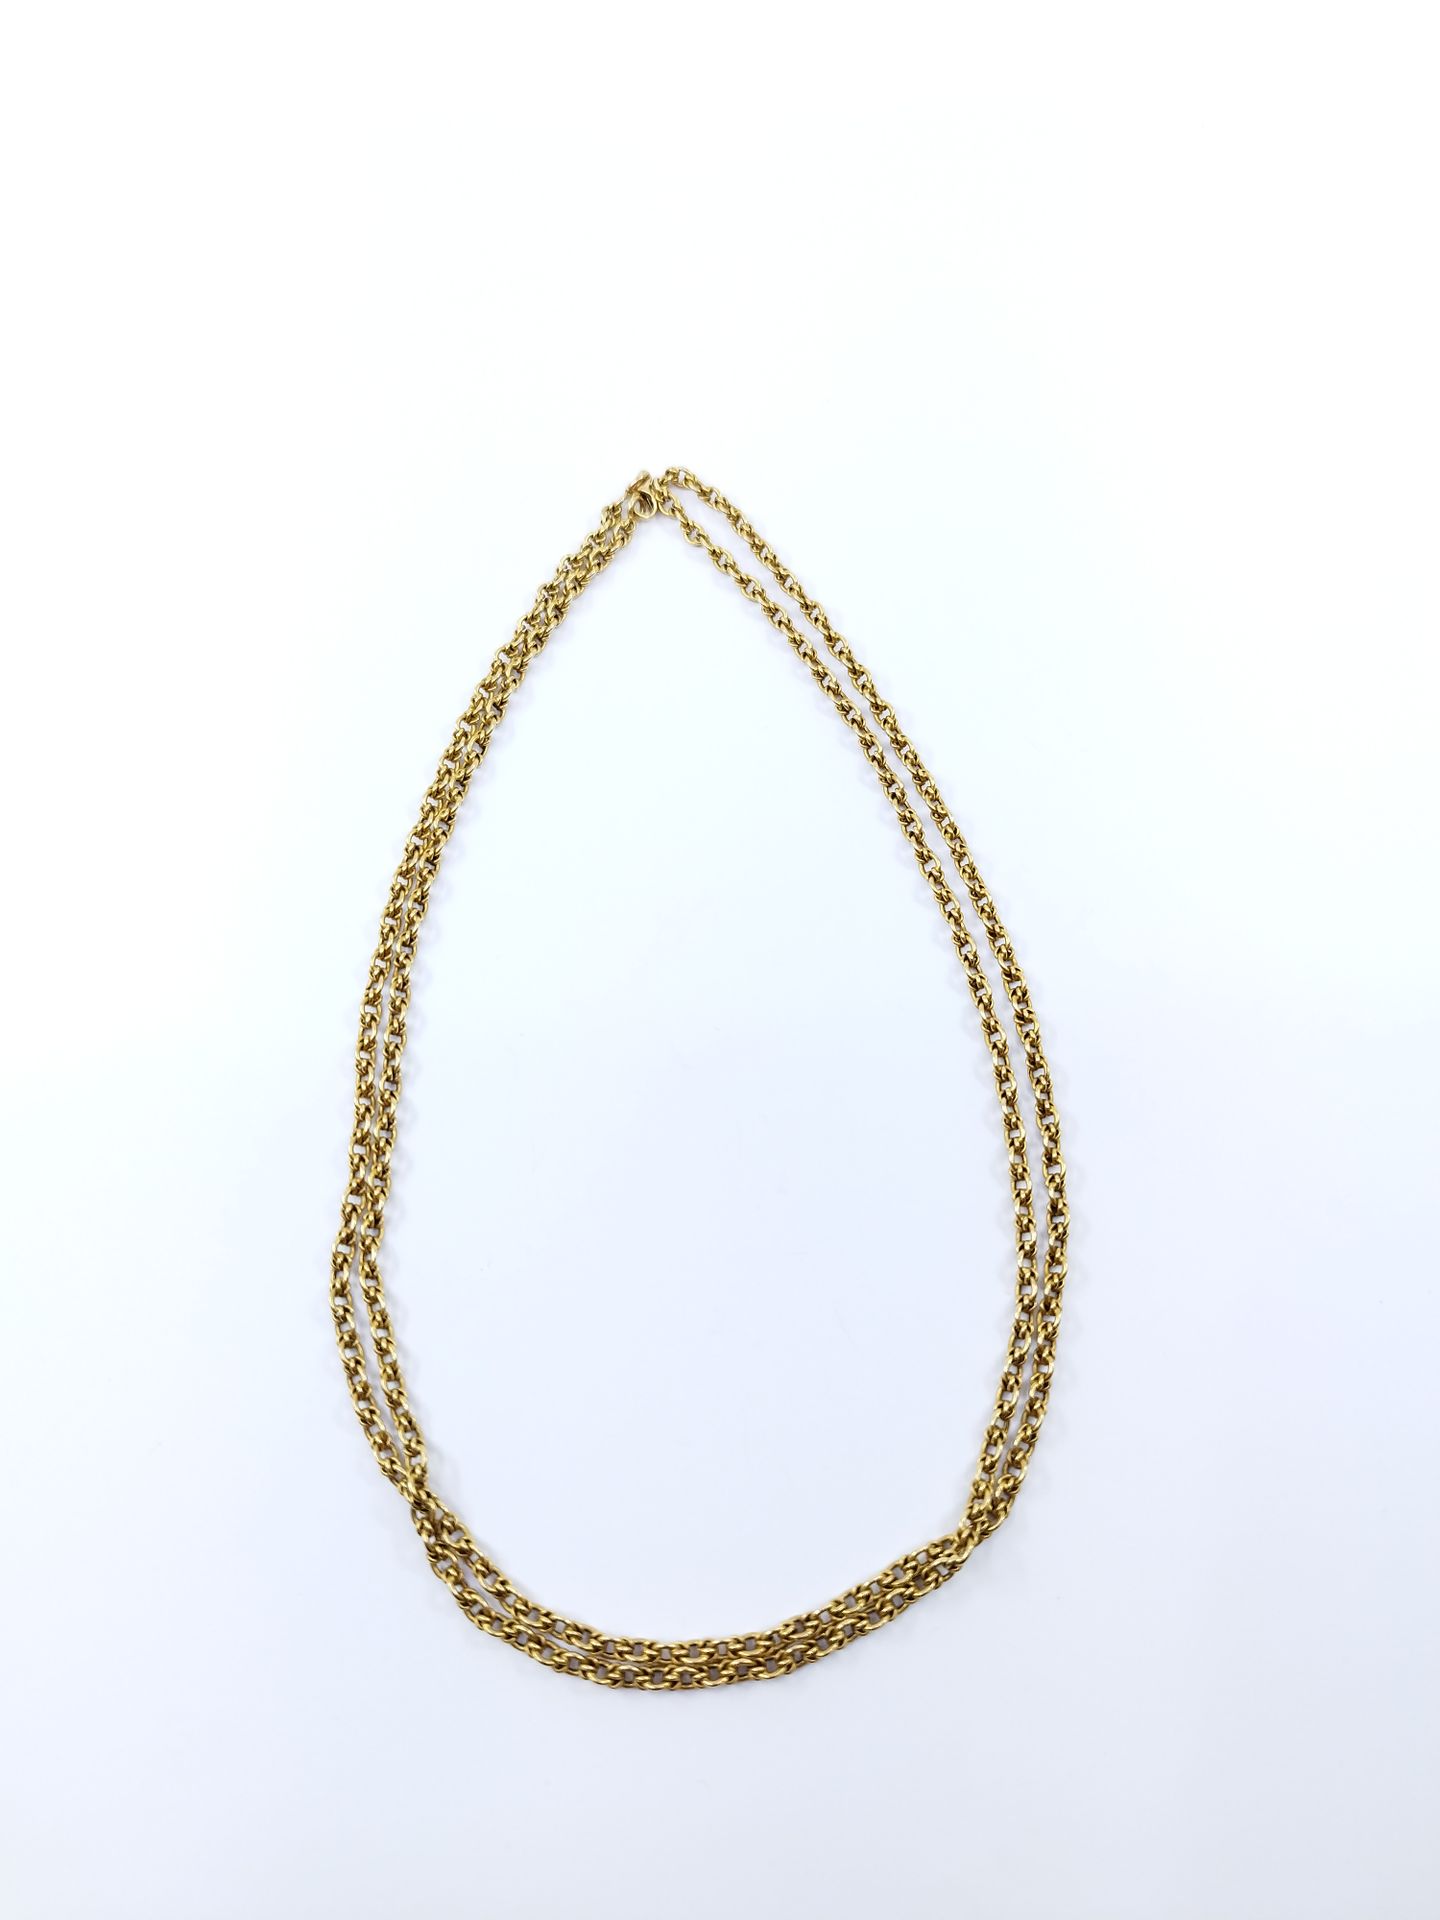 Null Long necklace in yellow gold 750°. 

Owl hallmark

Weight : 13,21 g